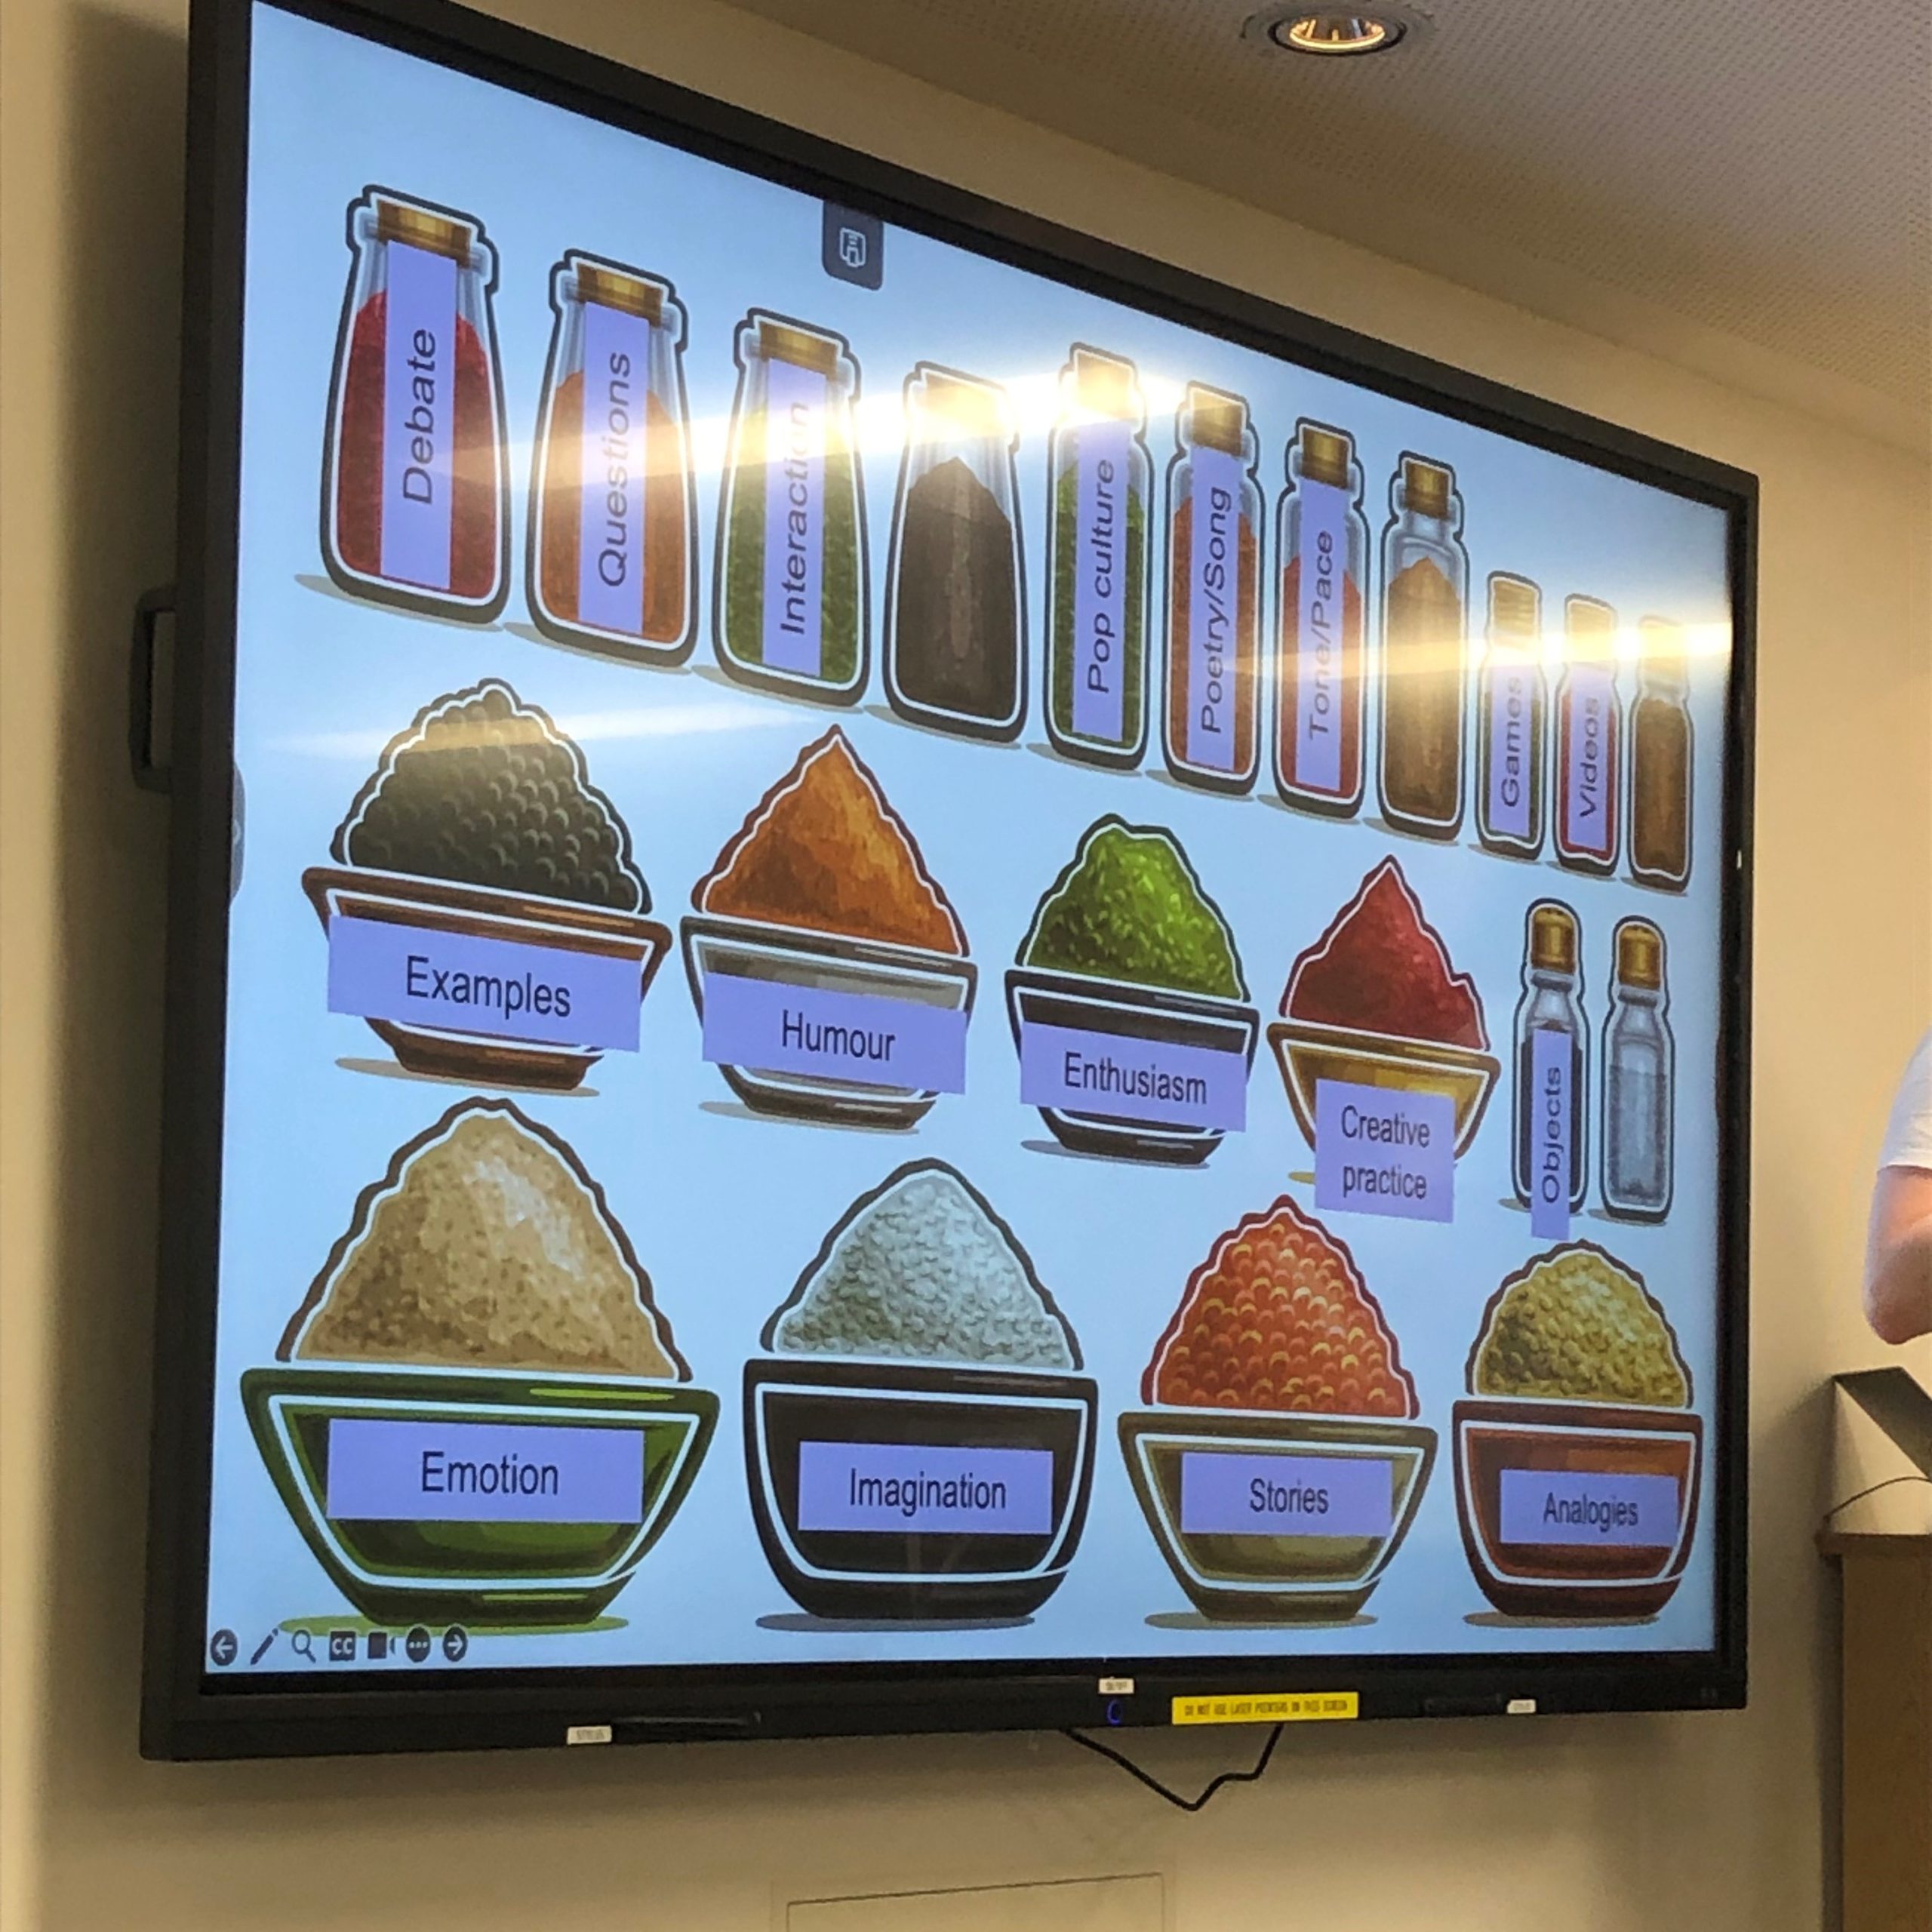 This image depicts one of Jamie Gallagher slides which includes many different spices and flavourings that can be added to 'spice up' your public engagement activity (used as part of a larger cooking analogy).